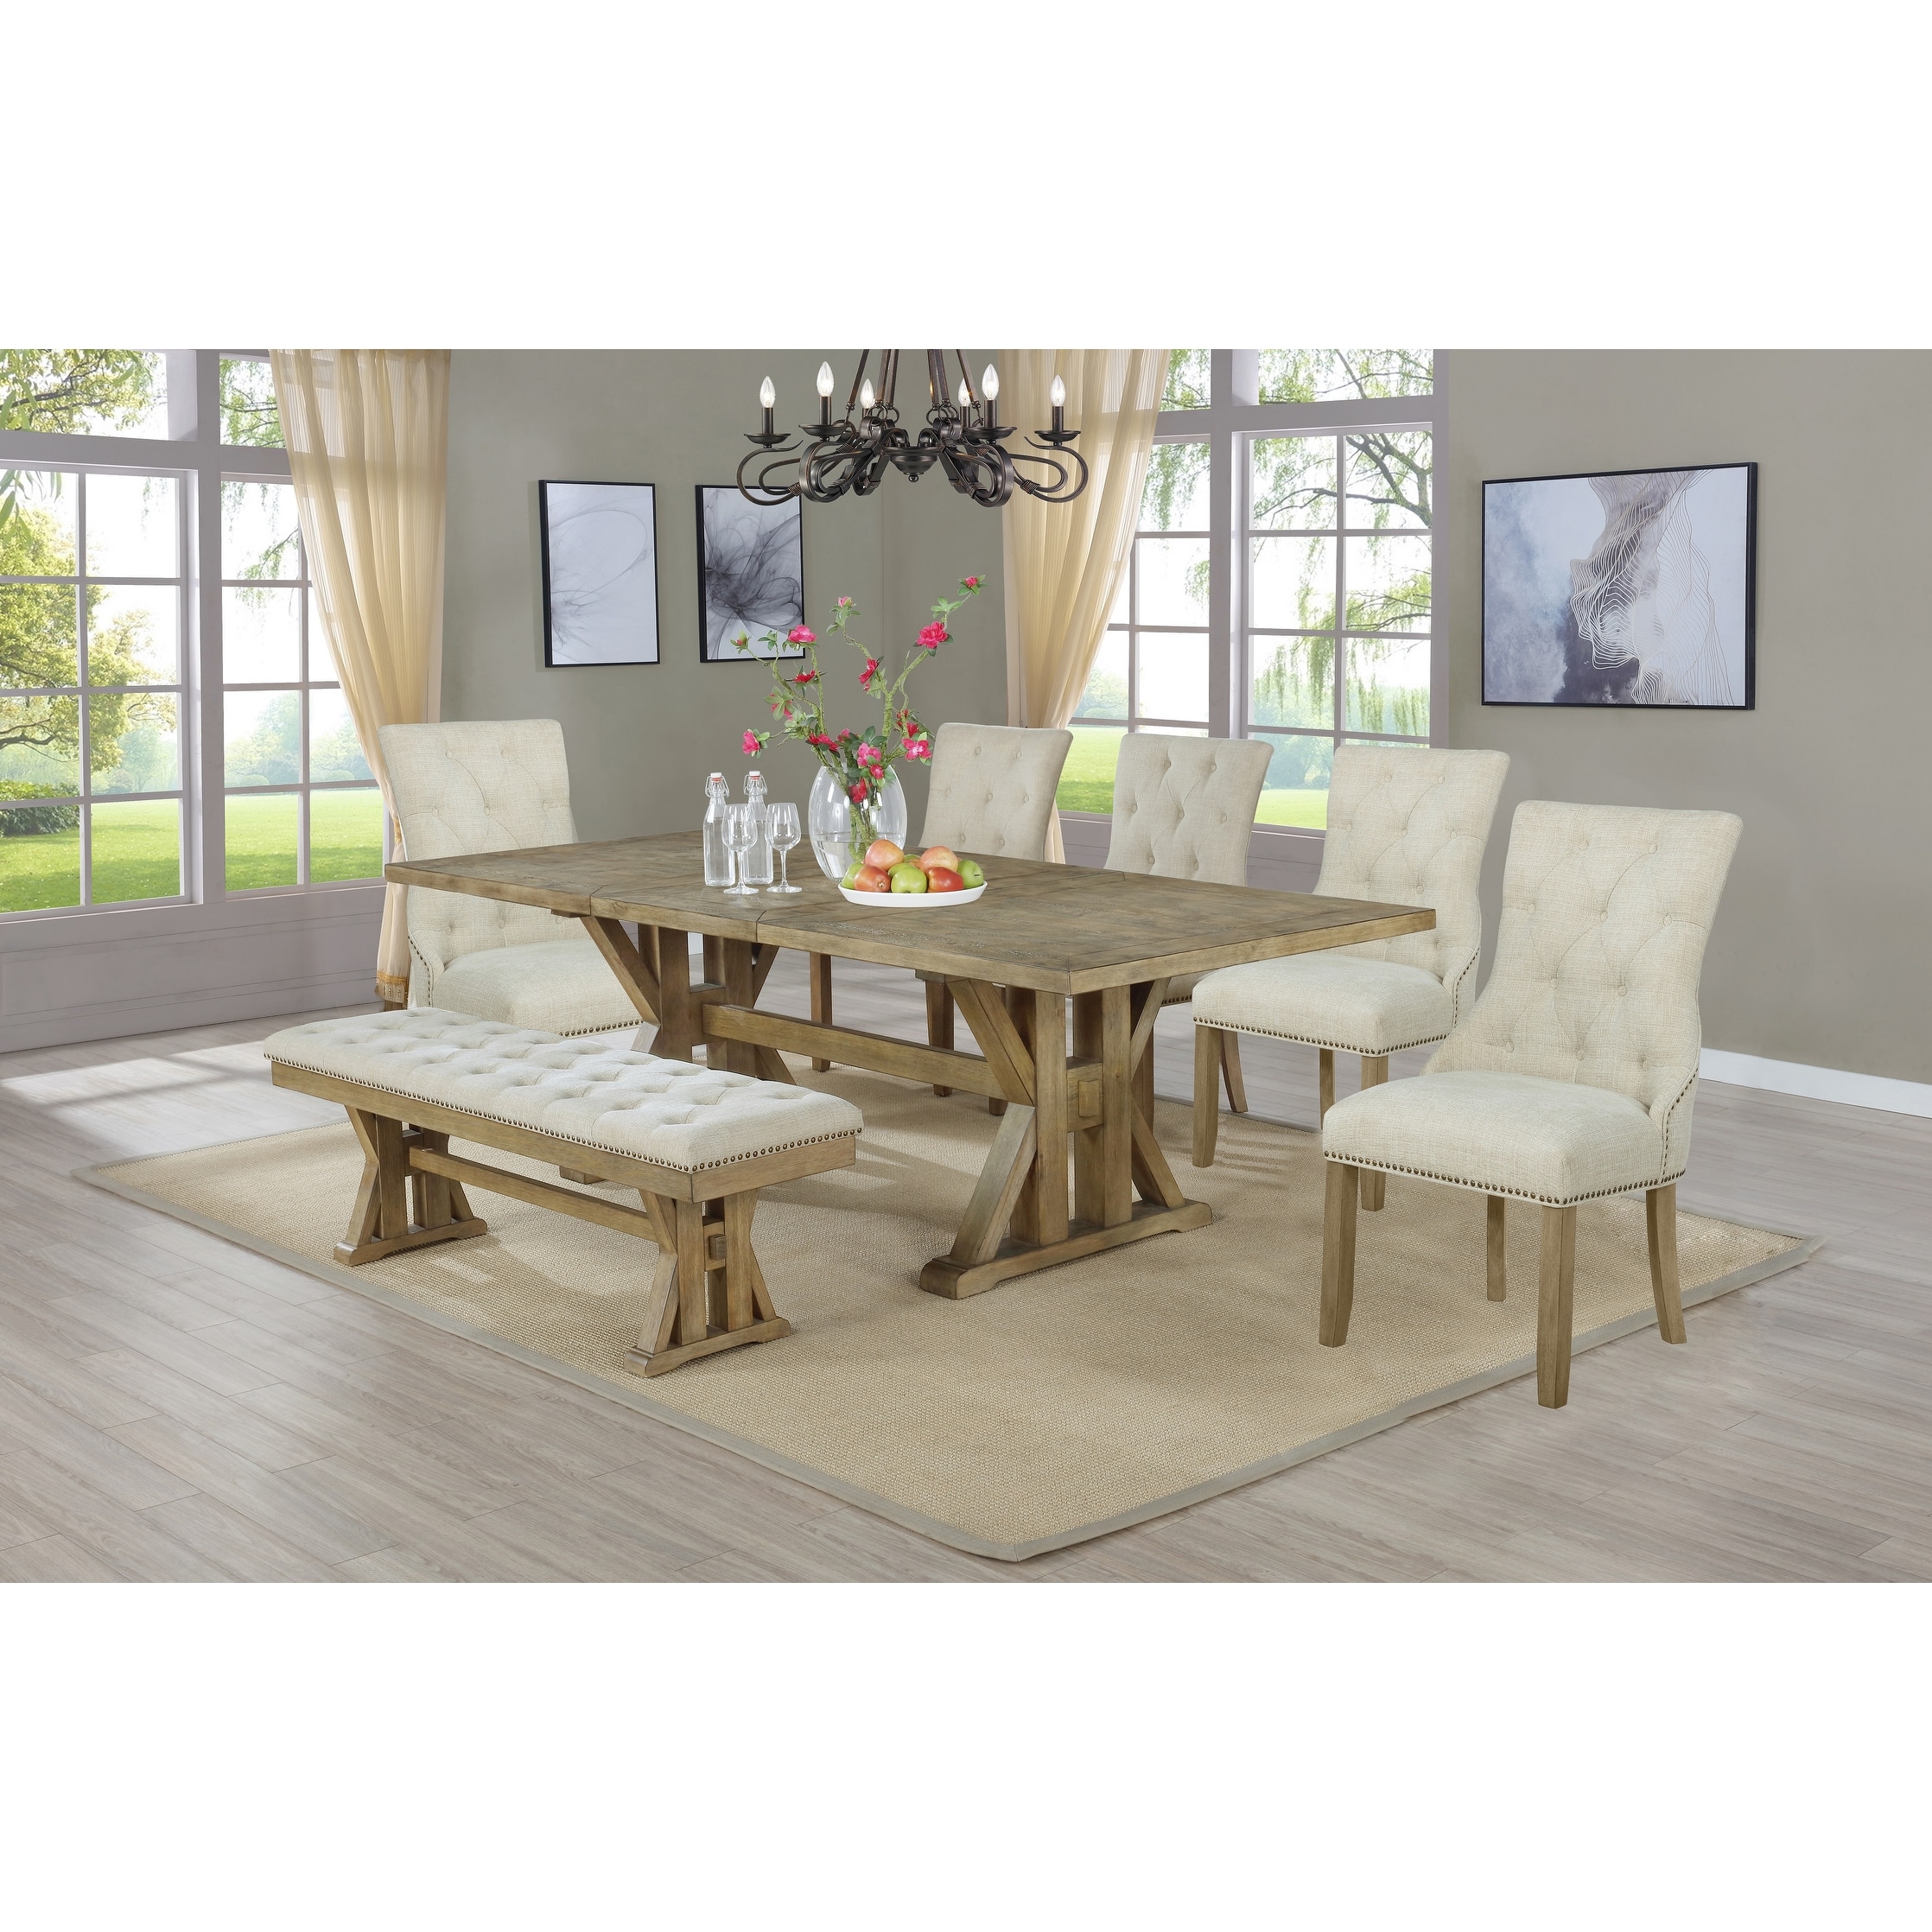 Best Quality Furniture Rustic Style 7 Piece Dining Set With Bench